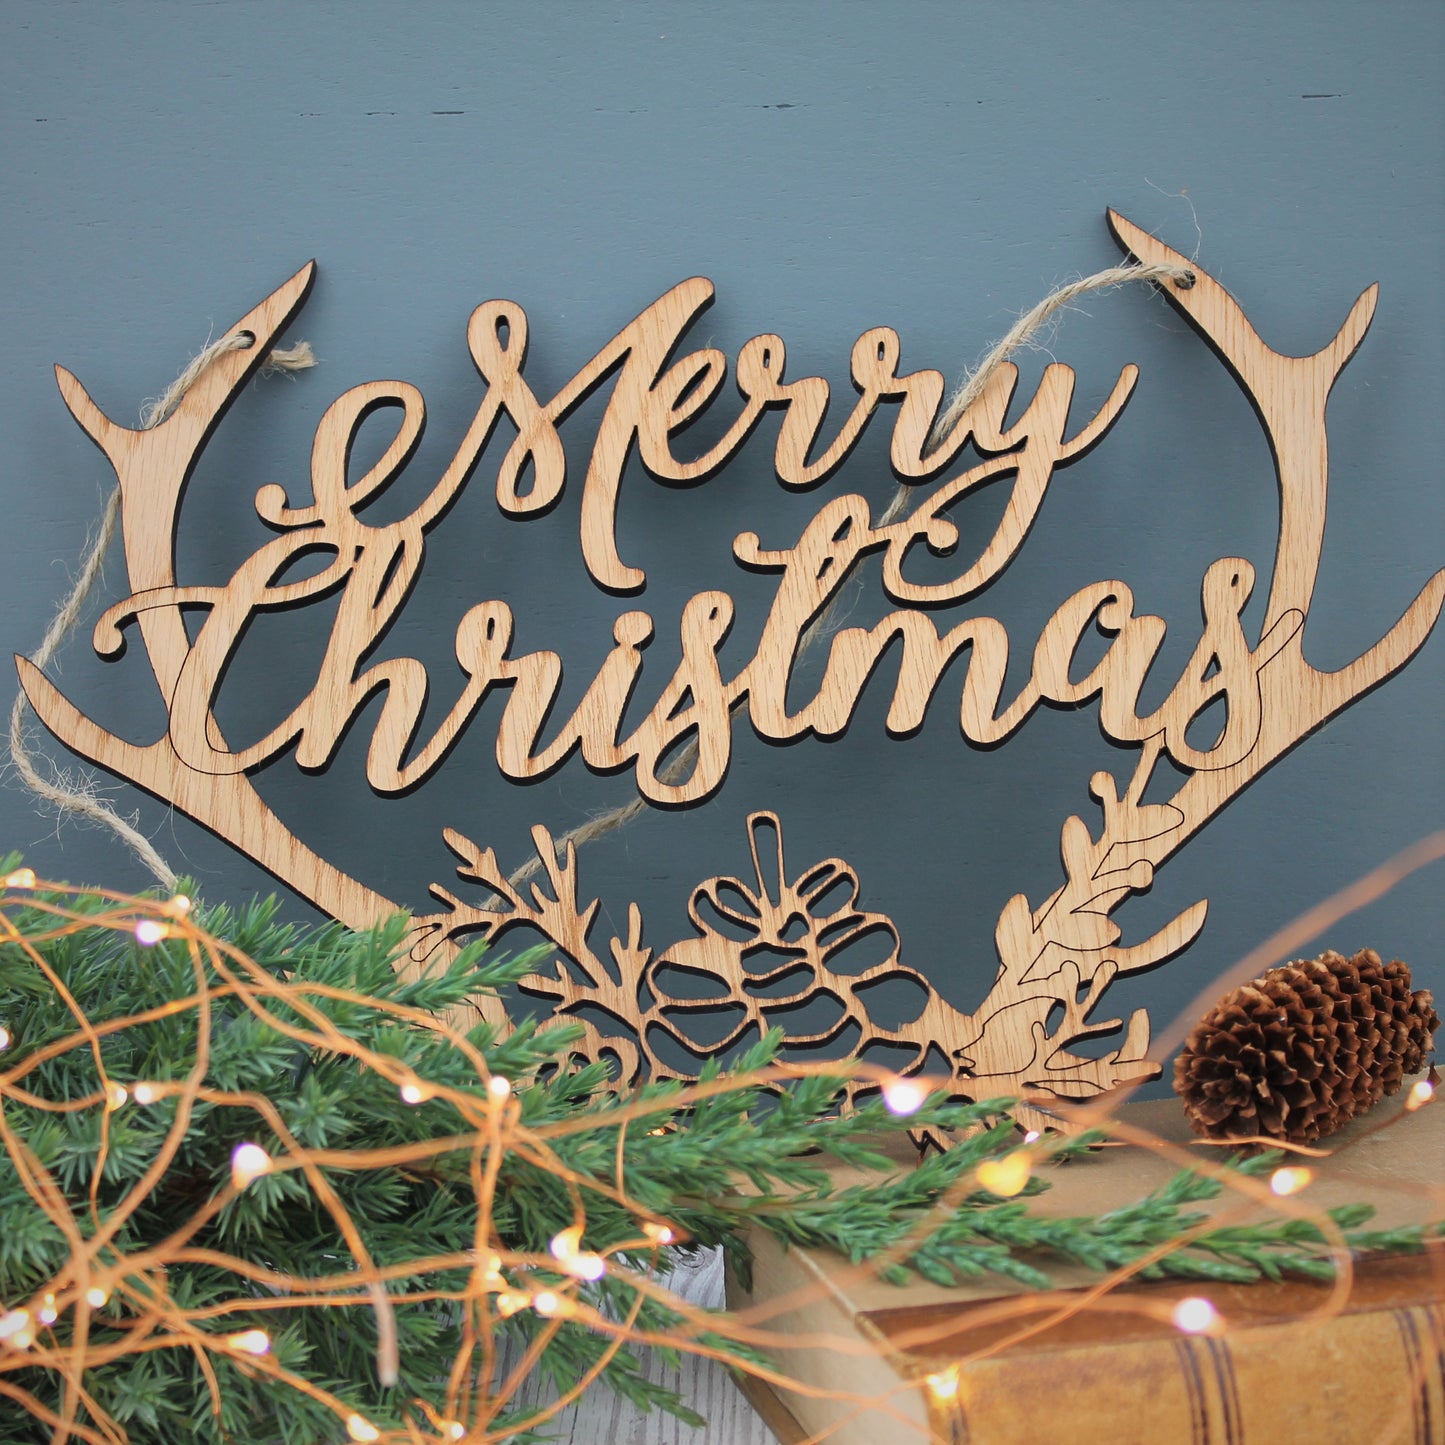 Merry Christmas Wooden Antler Decoration